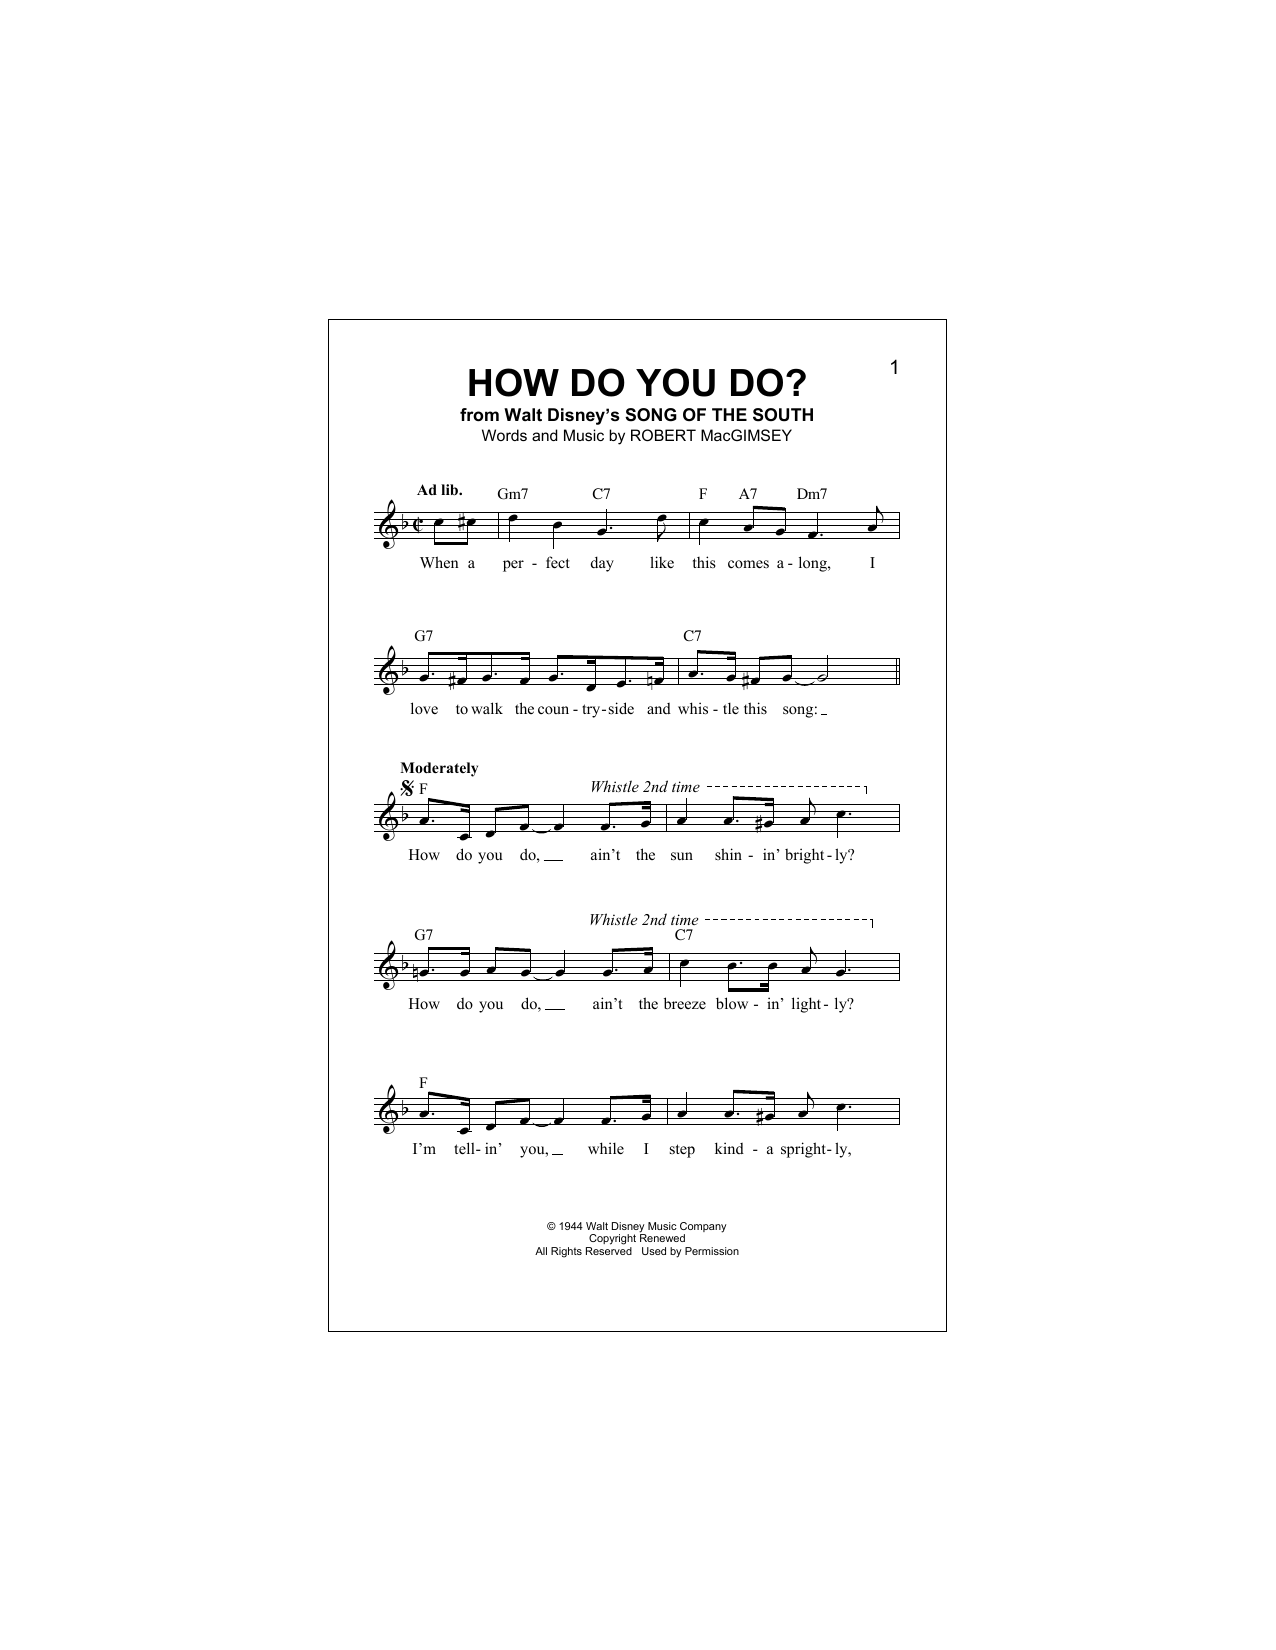 Robert MacGimsey How Do You Do? sheet music notes and chords. Download Printable PDF.